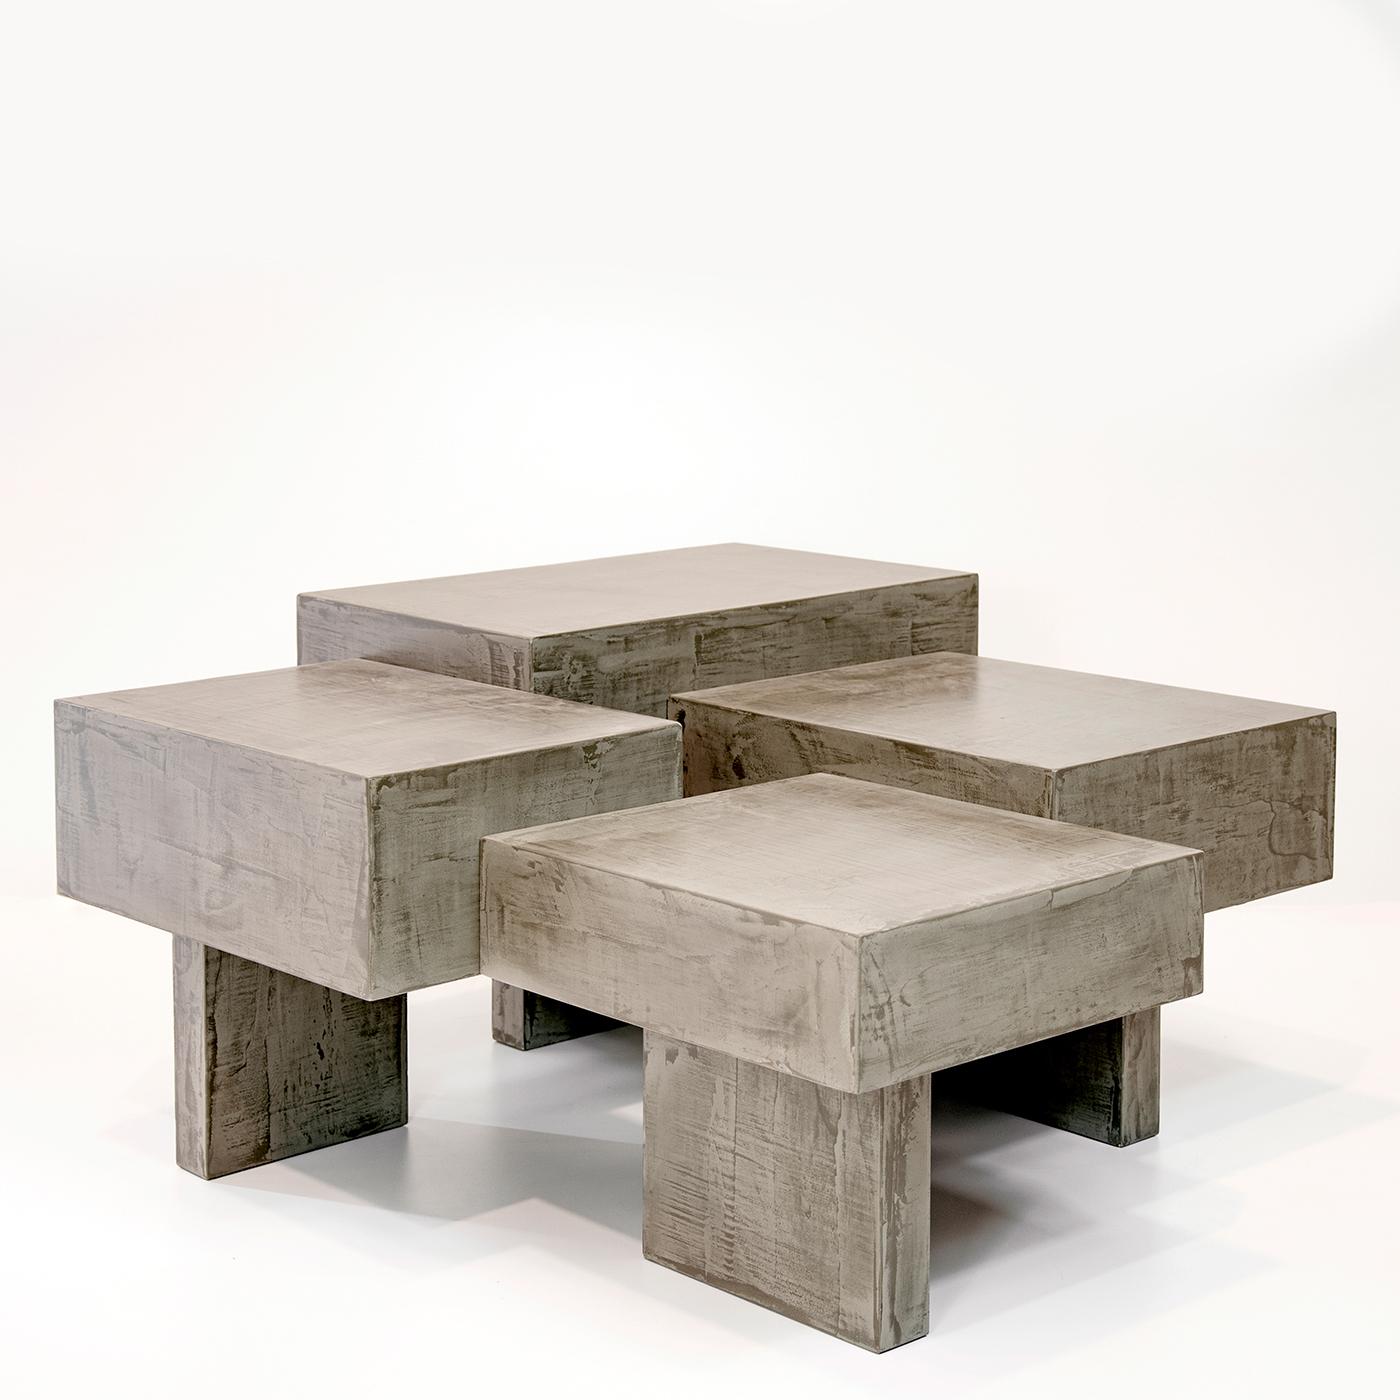 An interplay of geometries and perspectives, this impressive coffee table has a captivating, architectural design that introduces a unique atmosphere in a contemporary and eclectic interior decor. Made of wood covered in brushed light gray cement